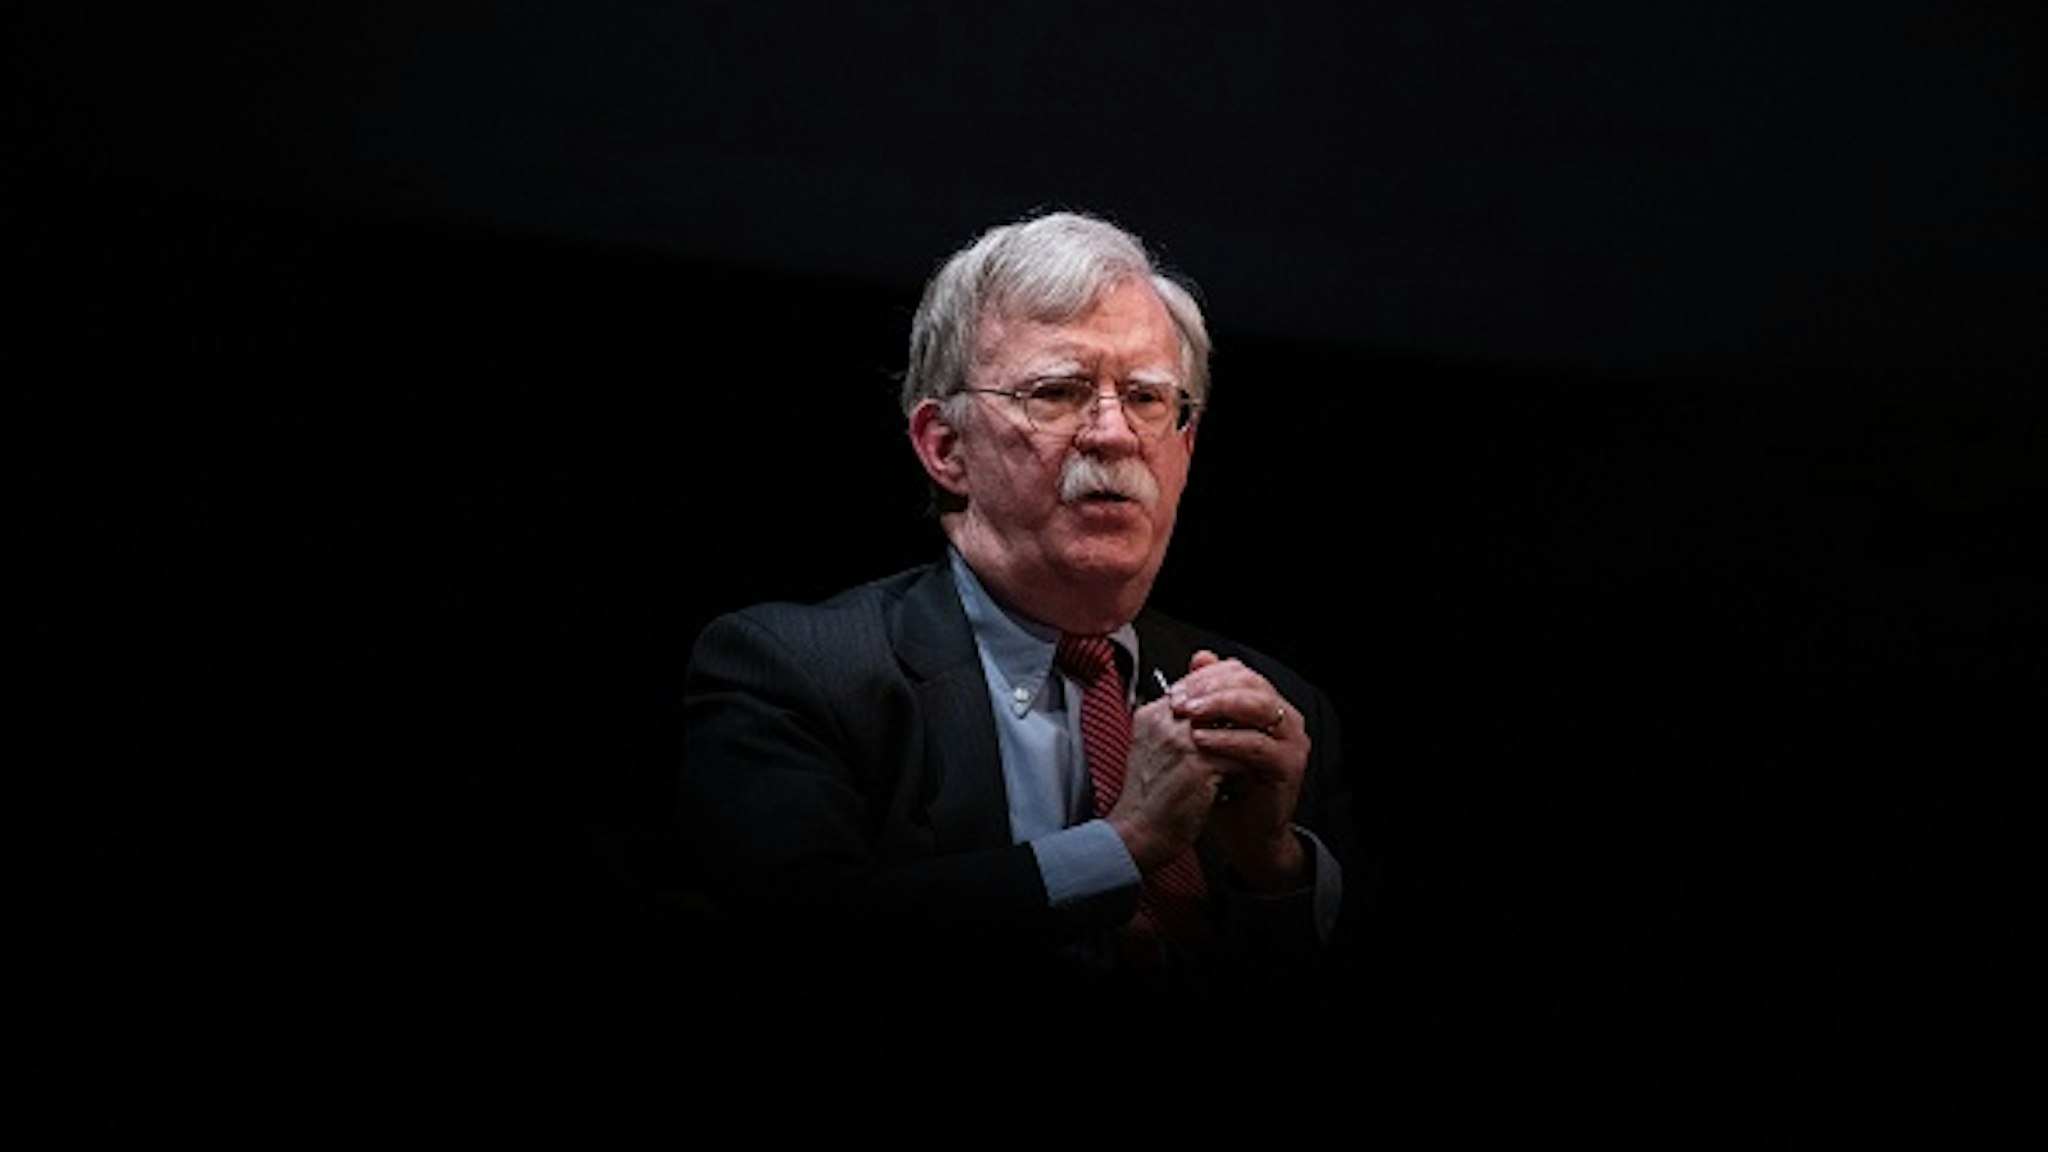 Former National Security adviser John Bolton speaks on stage during a public discussion at Duke University in Durham, North Carolina on February 17, 2020. - Bolton was invited to the school to discuss national security weeks after he was thought of as a key witness in the impeachment trial of President Donald Trump.